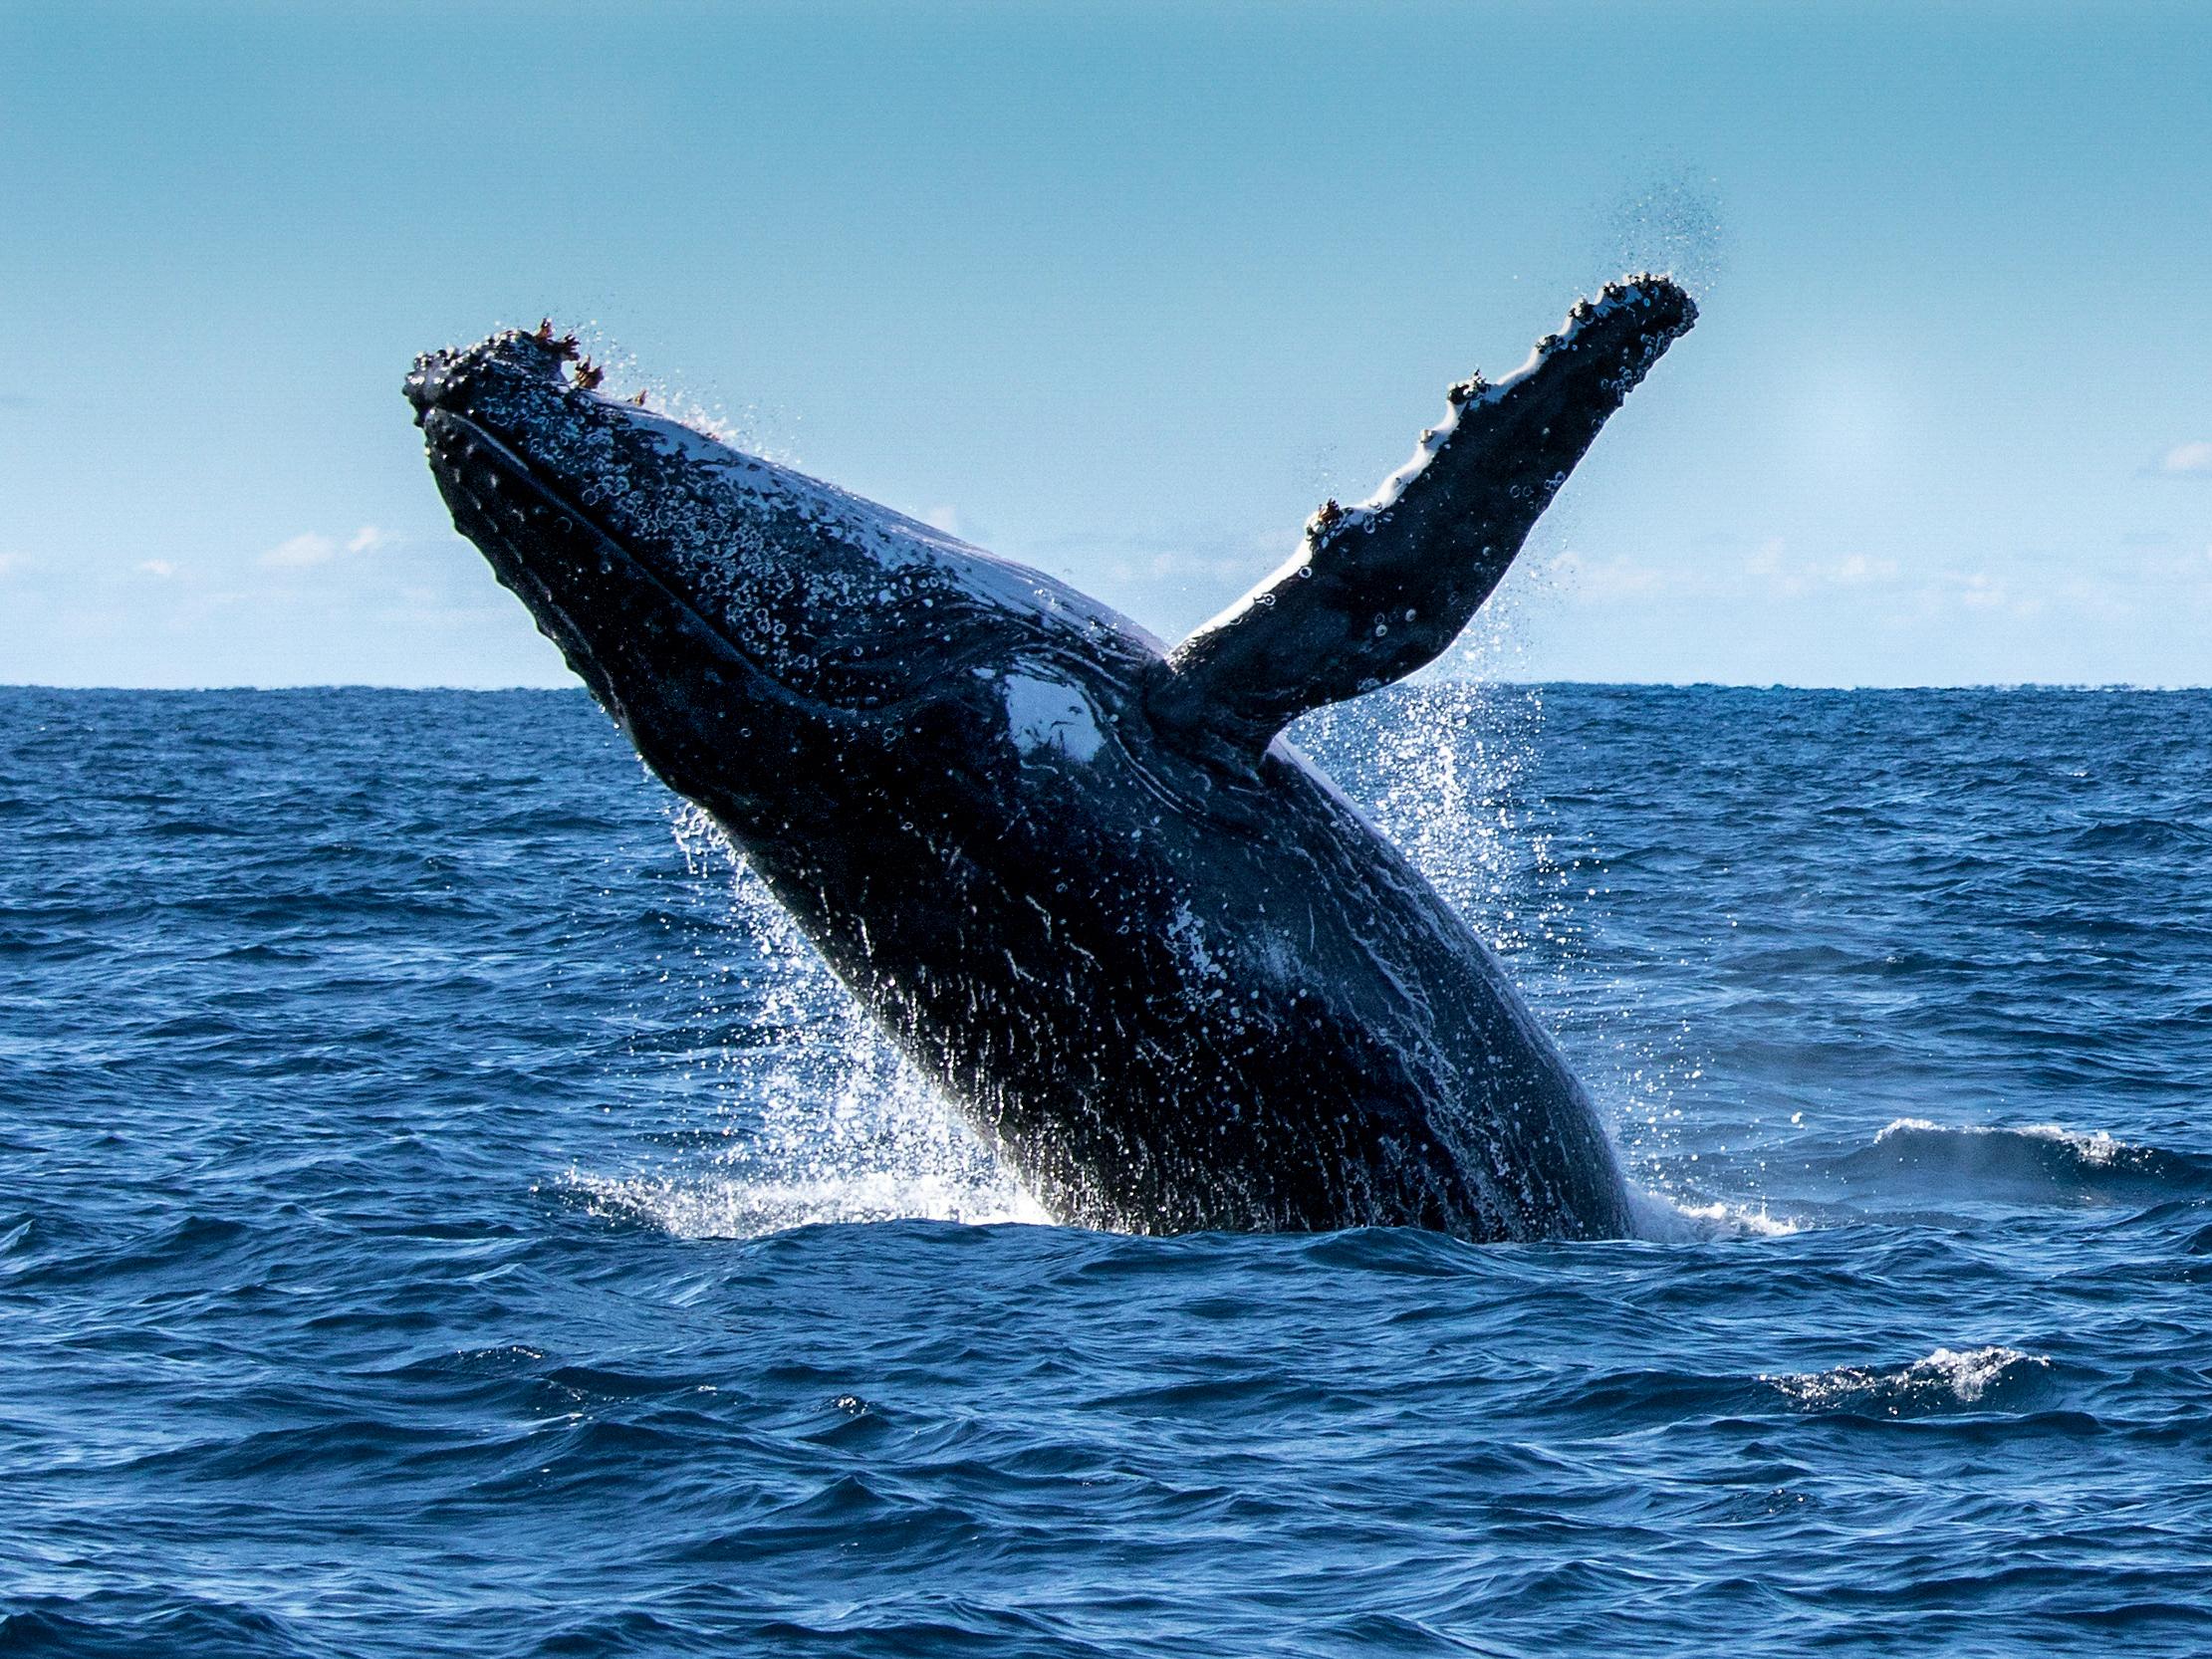 Whales transport a cargo of barnacles with them as they travel around the world